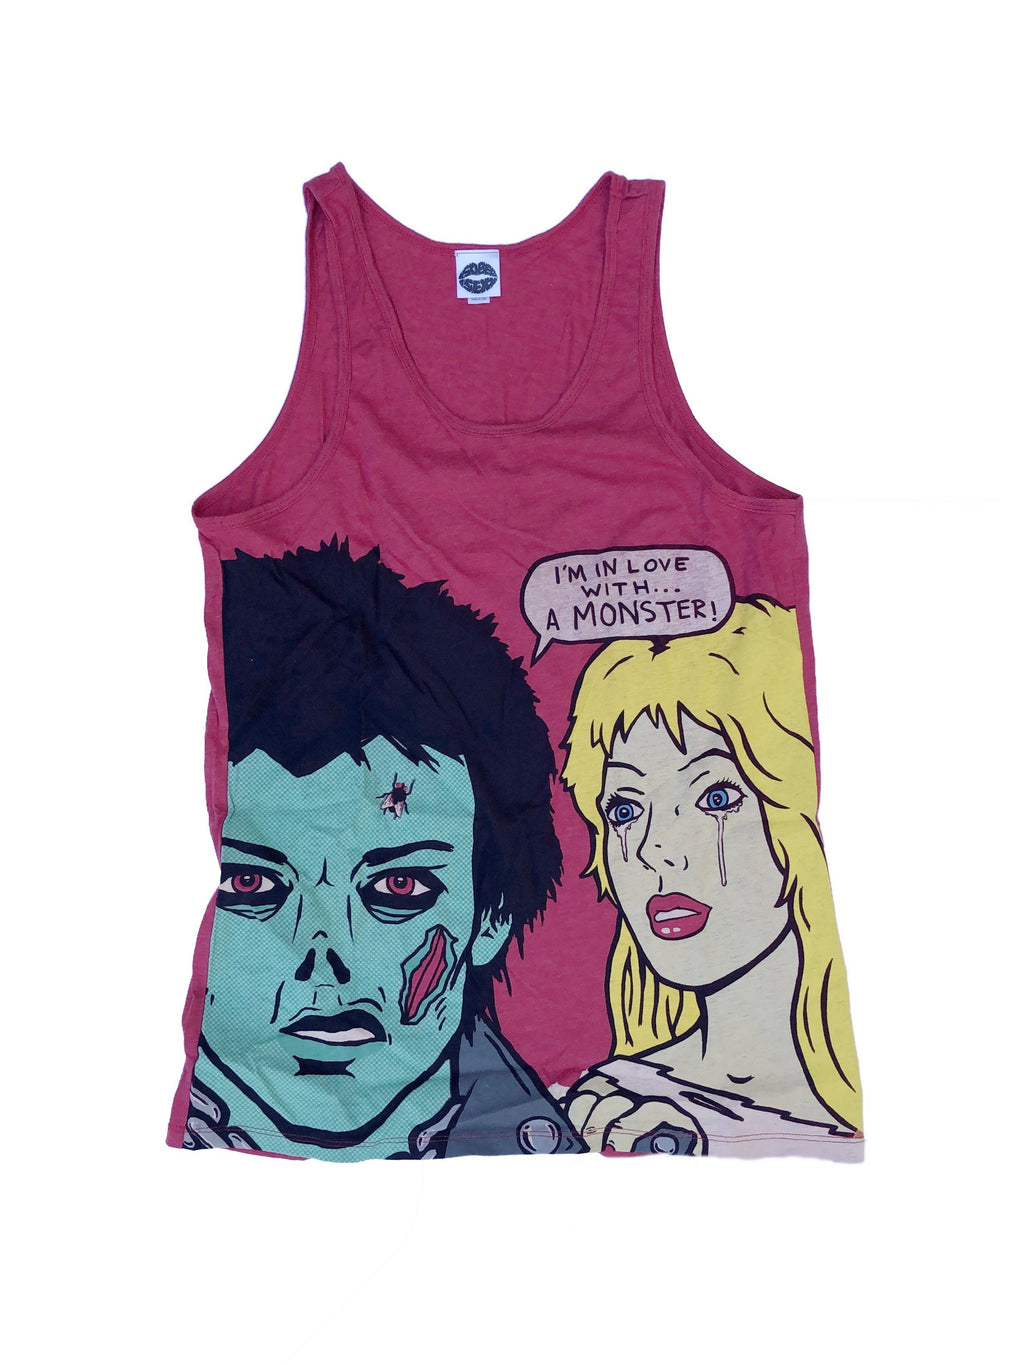 In Love With a Monster Tank Top - Red